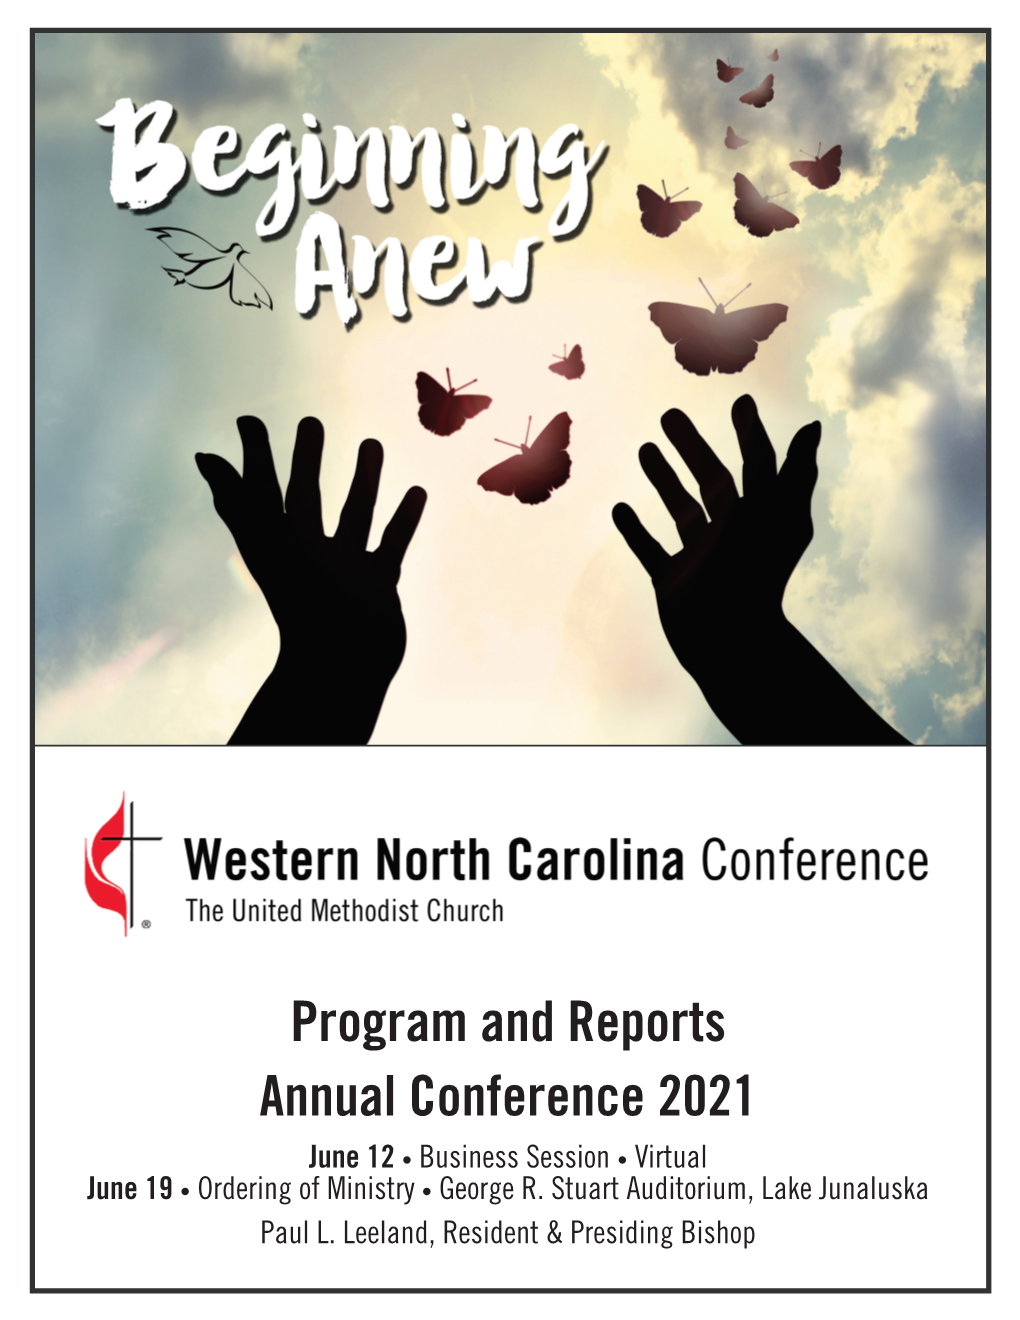 Program and Reports Annual Conference 2021 June 12 • Business Session • Virtual June 19 • Ordering of Ministry • George R